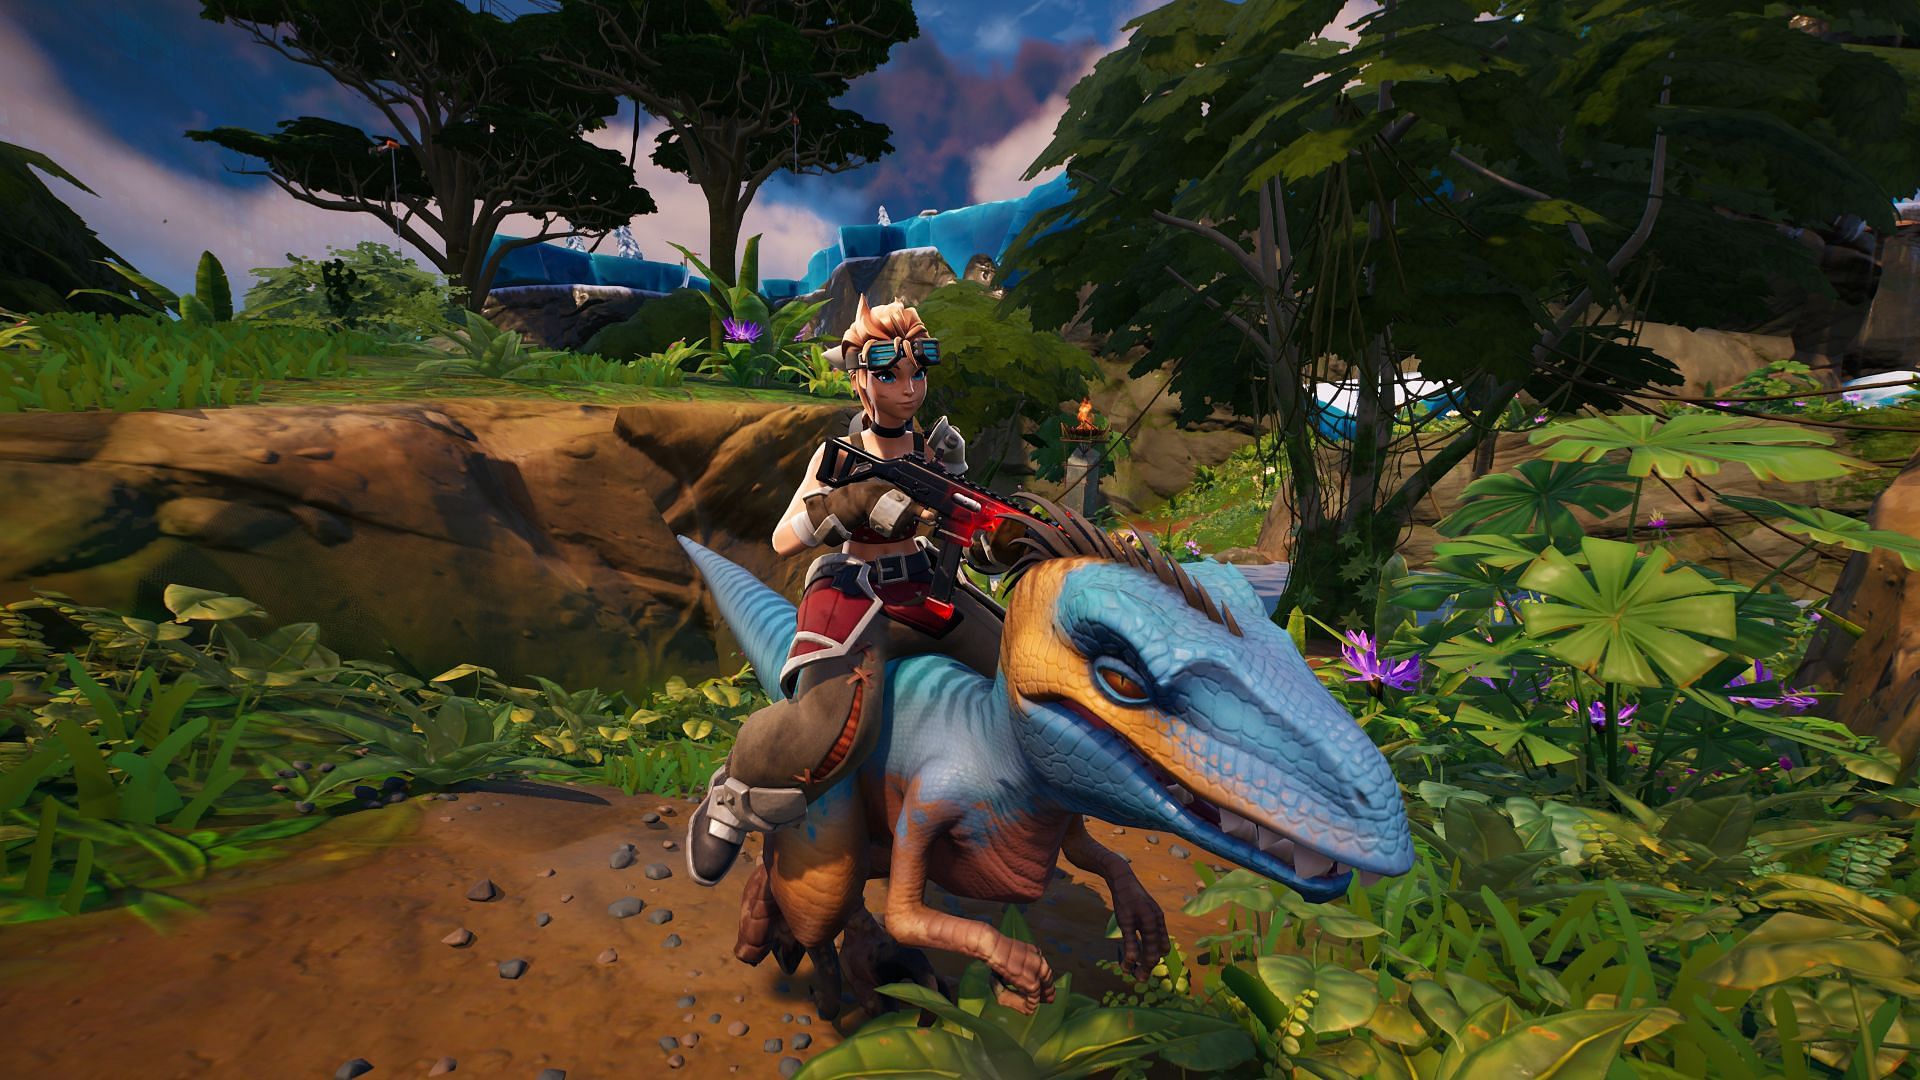 Fortnite leaks suggest open-world game mode to feature different biomes, wildlife, NPCs, and more (Image via Epic Games/Fortnite)